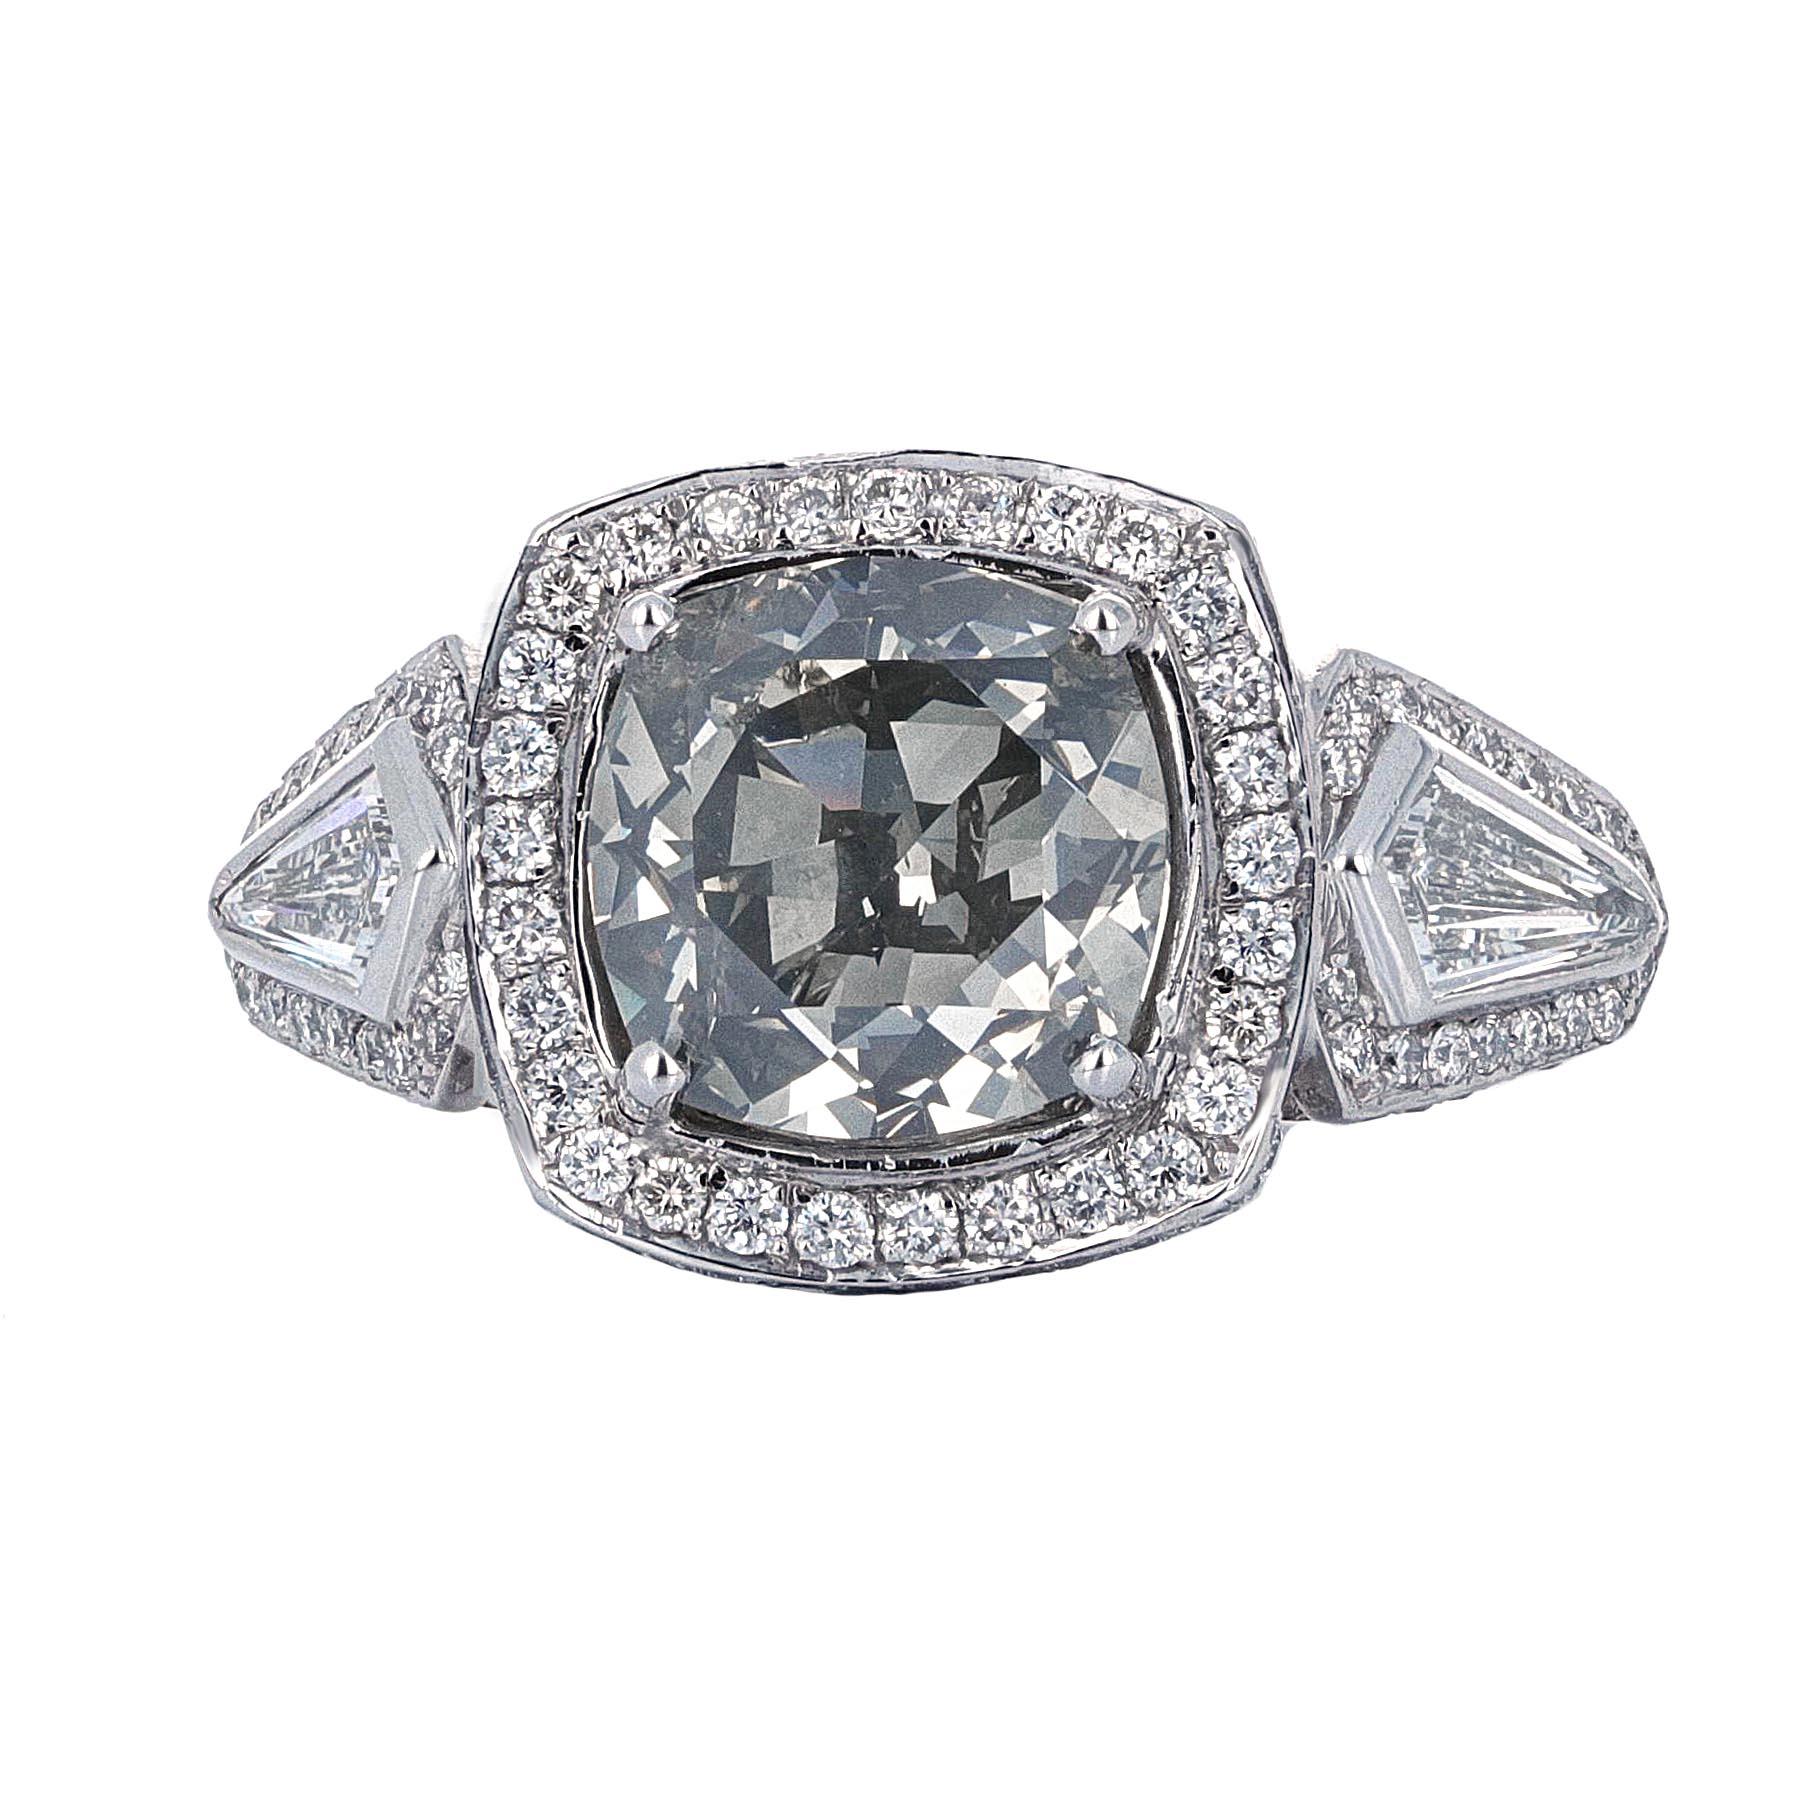 GIA certified, 5.08 carat Fancy Gray diamond engagement ring. The GIA describes the center stone as a cushion modified brilliant weighing 5.08 carats. The color is Fancy Gray and has even color distribution. The stone measures 9.33 x 9.28 x 7.17 mm